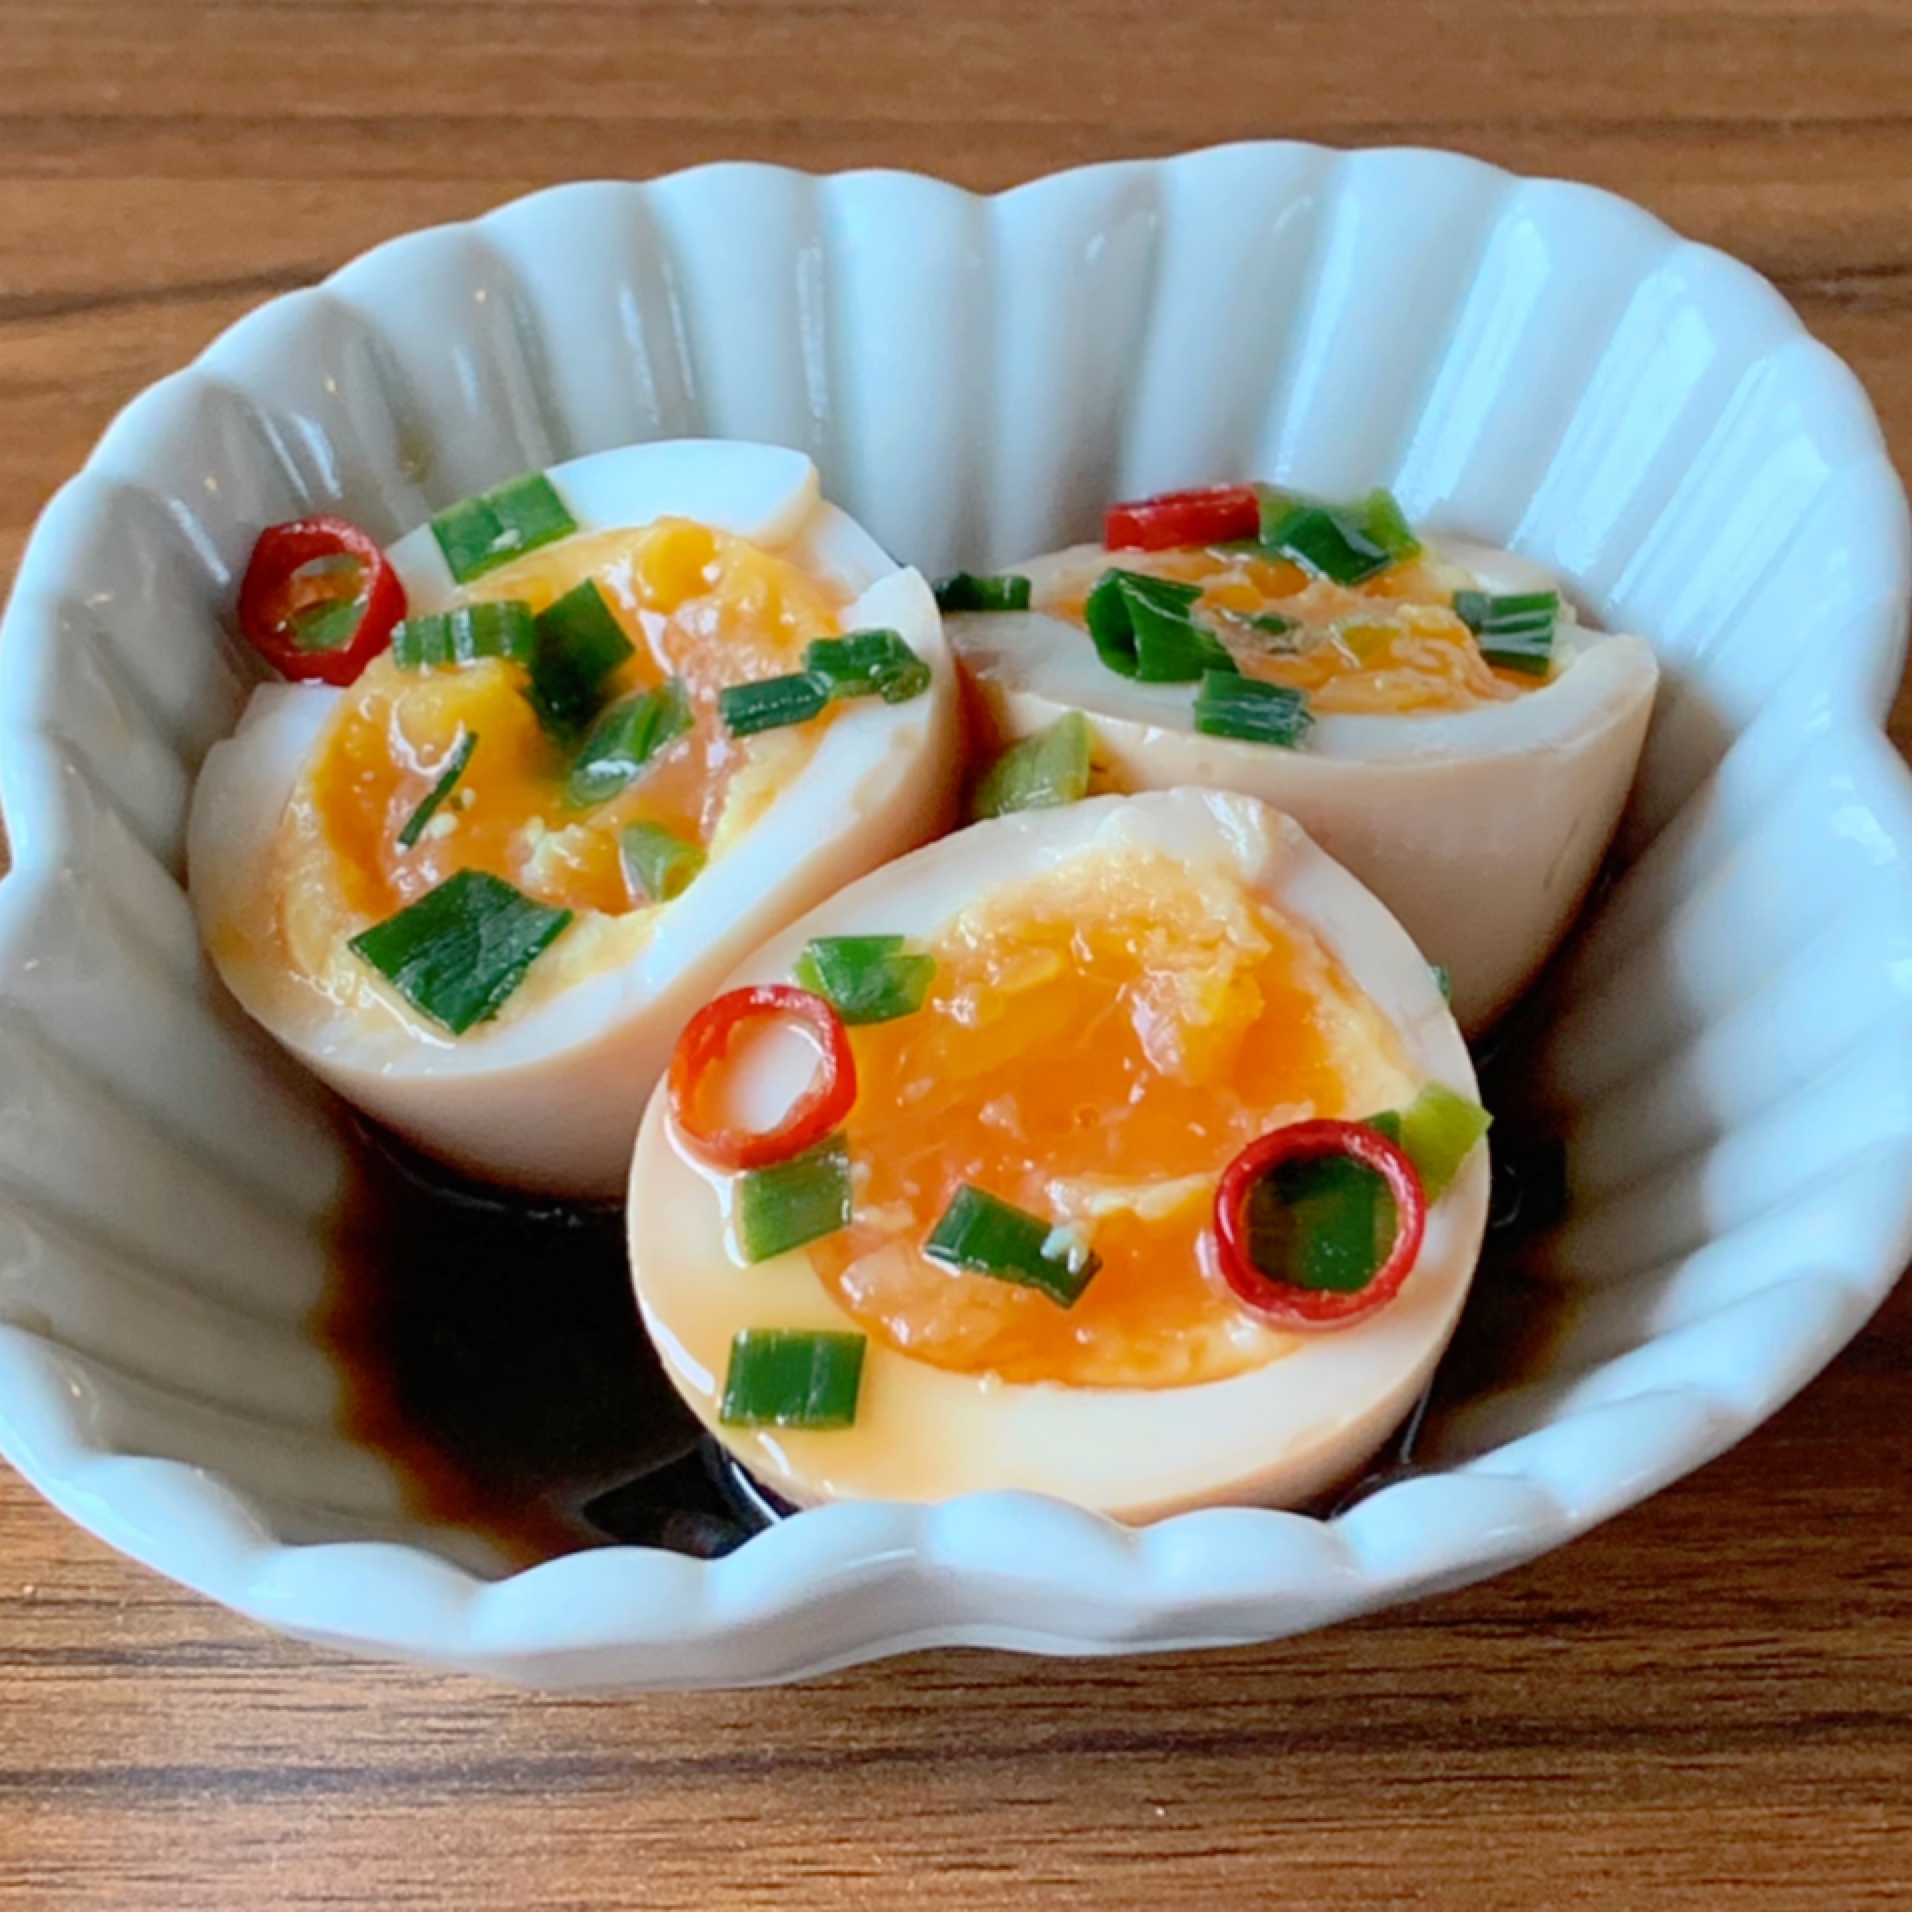 Boiled eggs are marinated in a sauce that combines soy sauce, mirin, sesame oil, and red pepper.